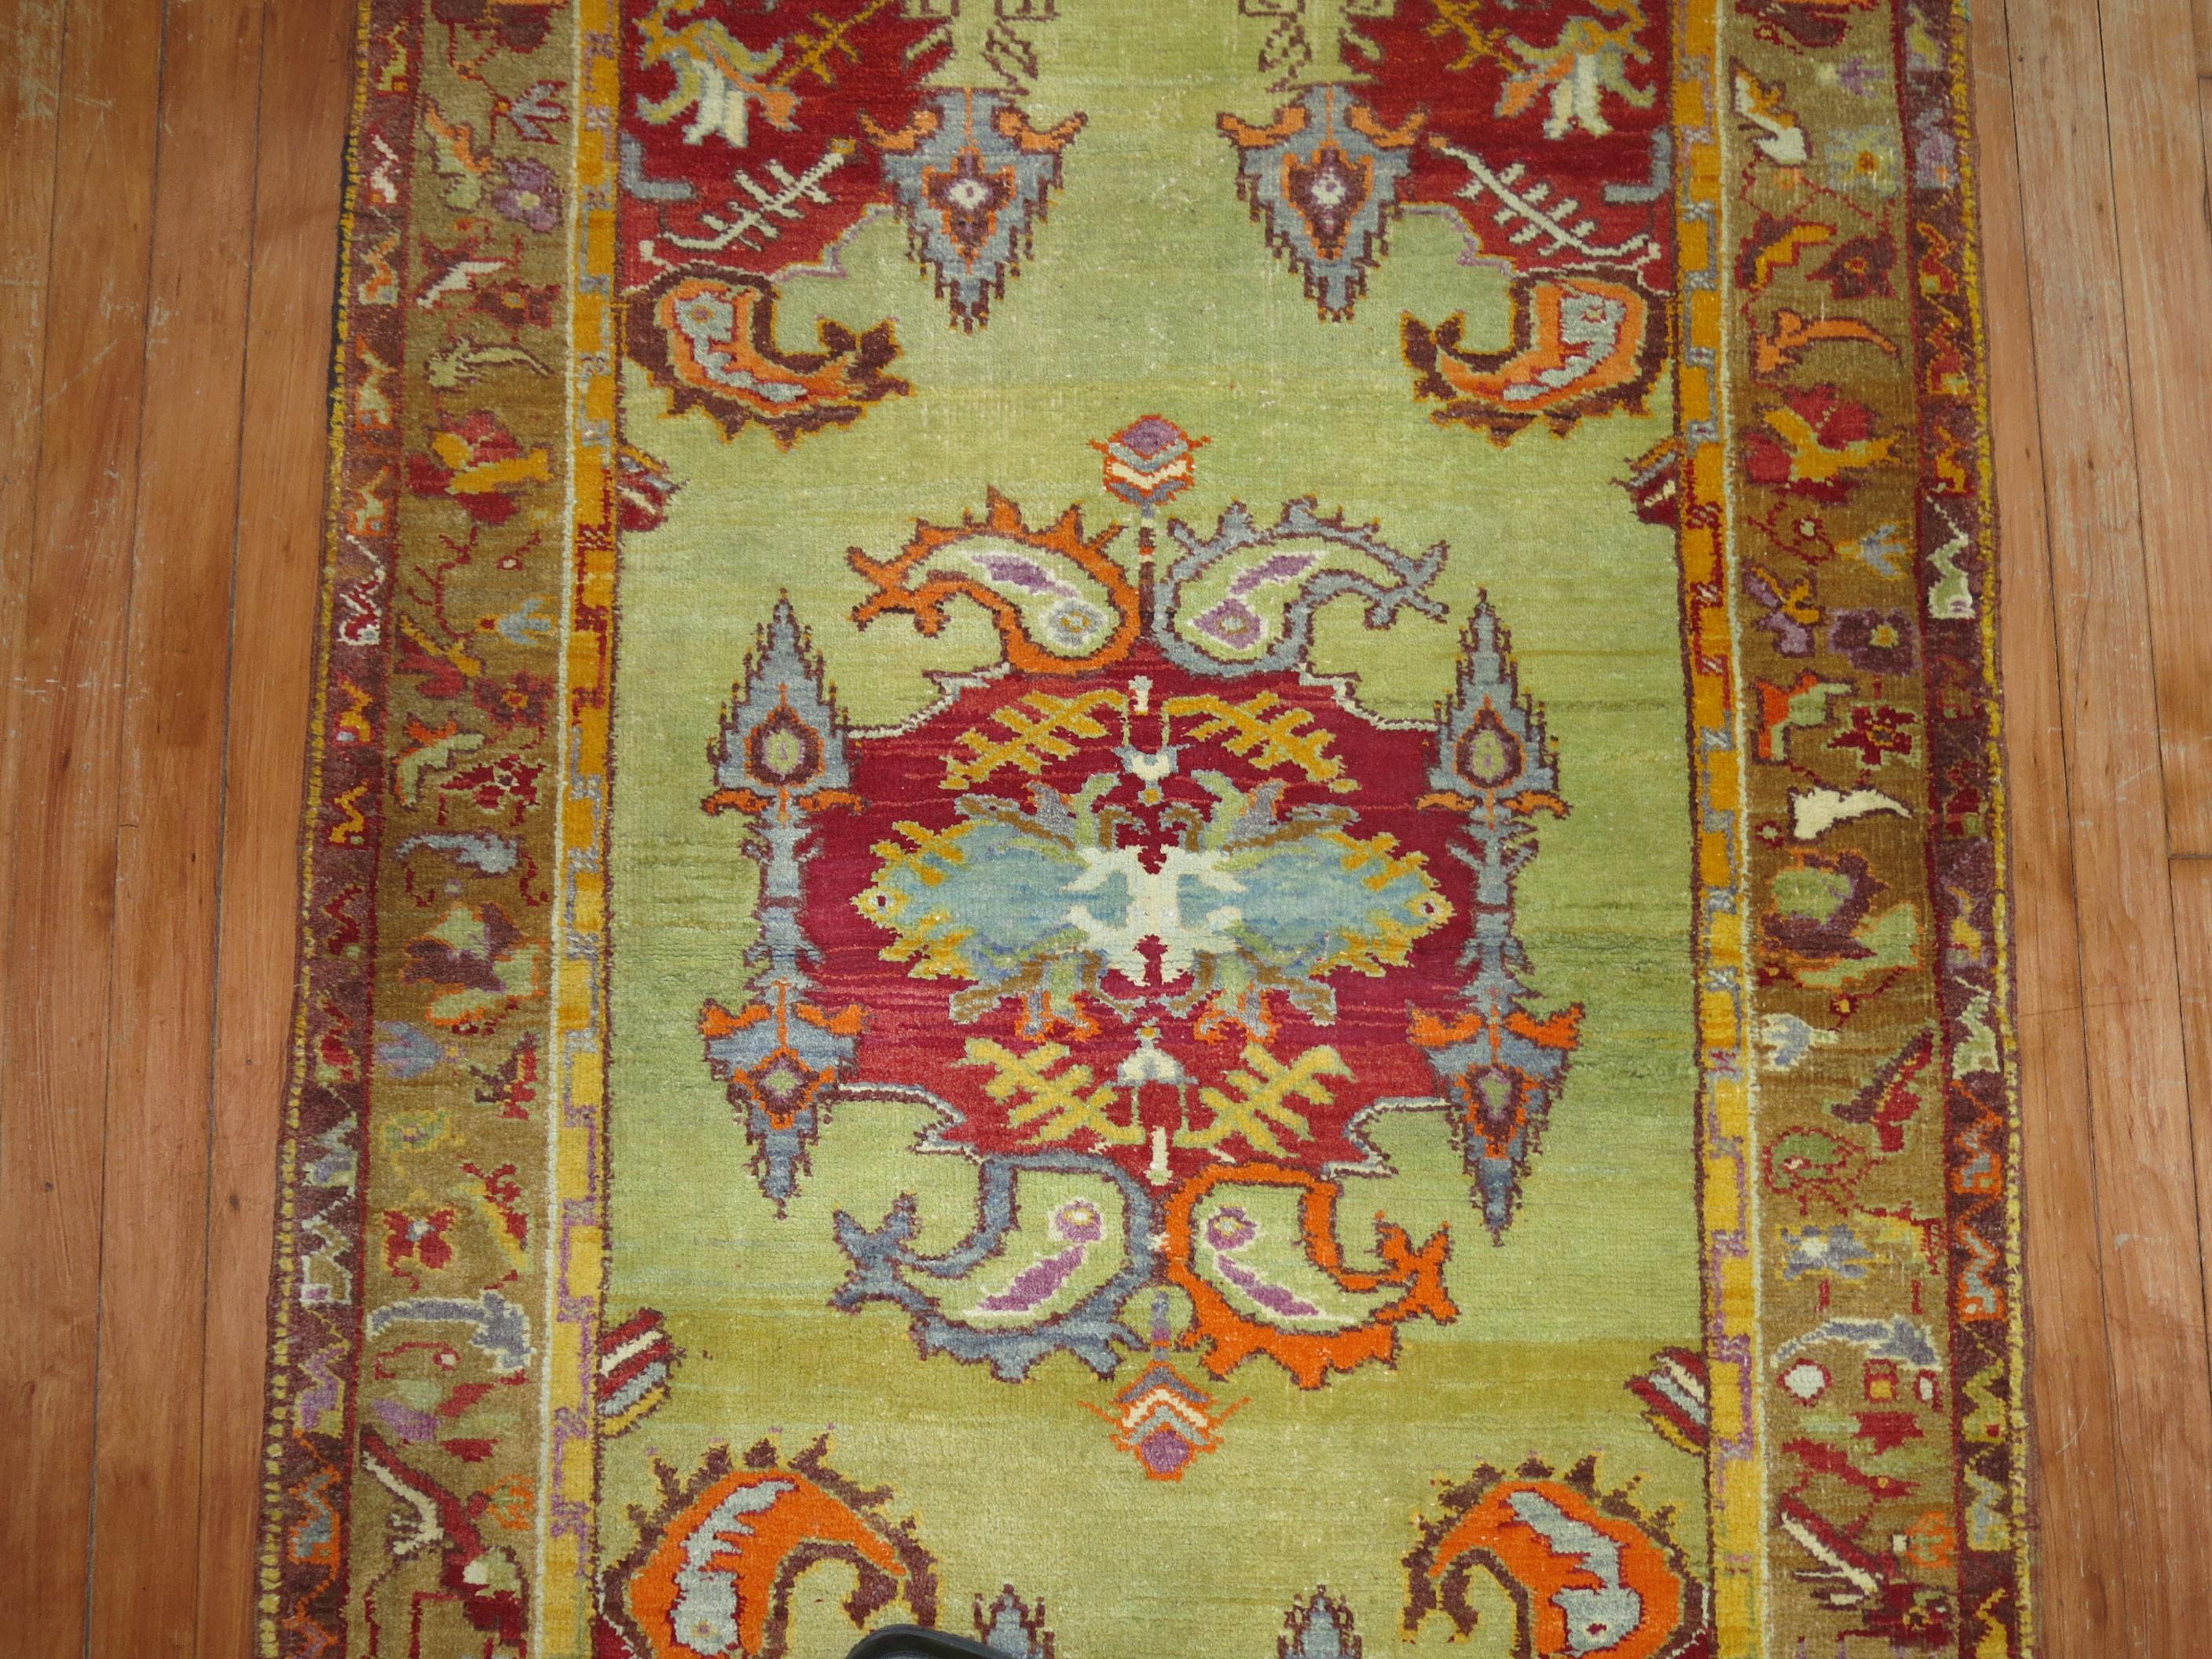 Hand-Woven Lime Green Antique Turkish Rug, 20th Century